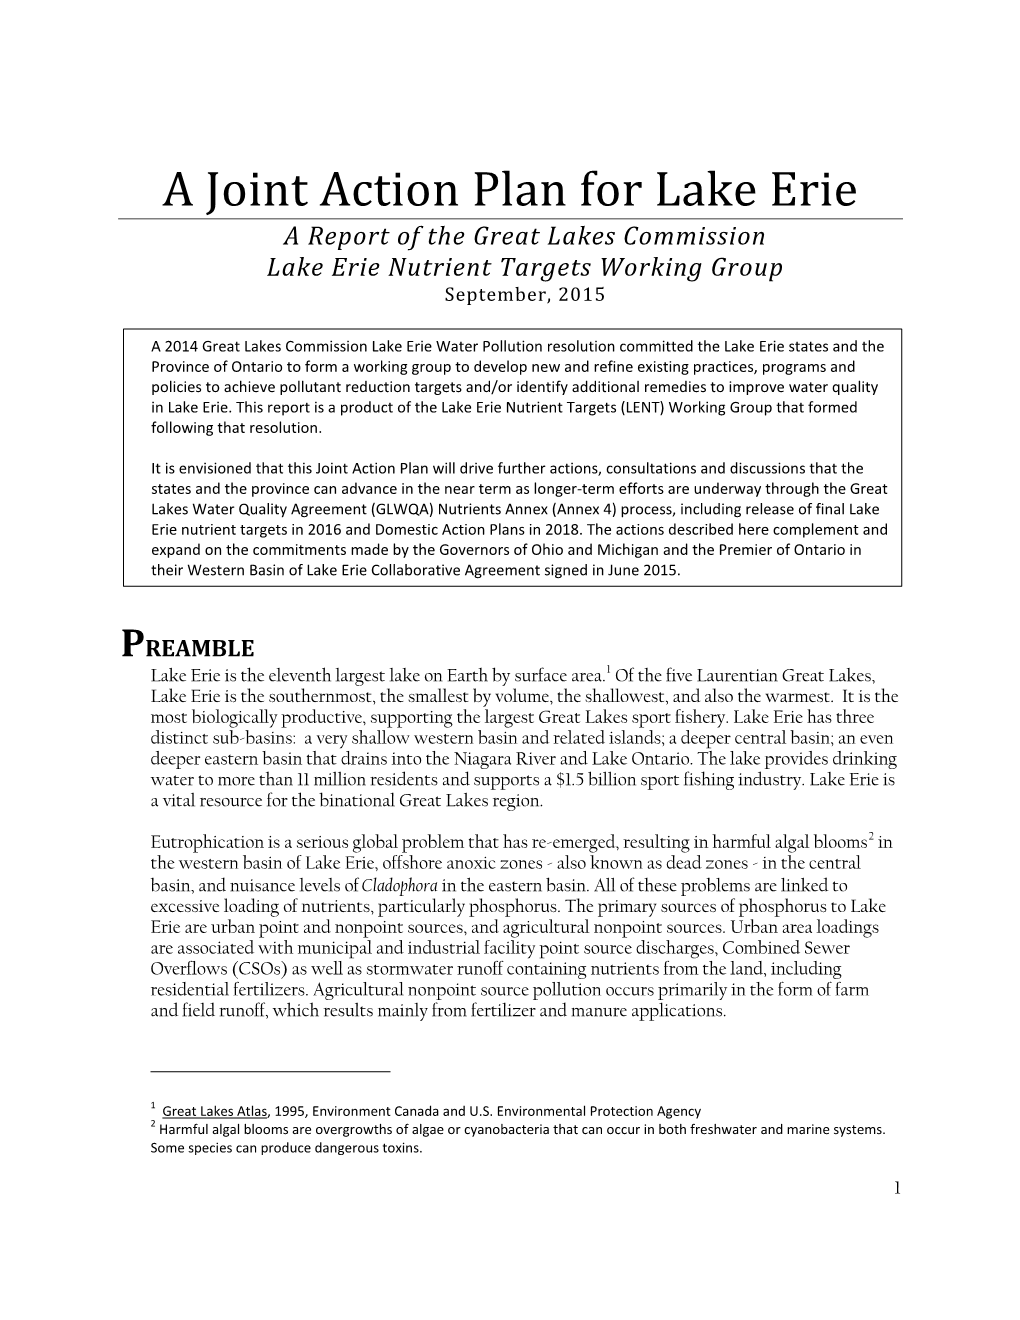 A Joint Action Plan for Lake Erie a Report of the Great Lakes Commission Lake Erie Nutrient Targets Working Group September, 2015